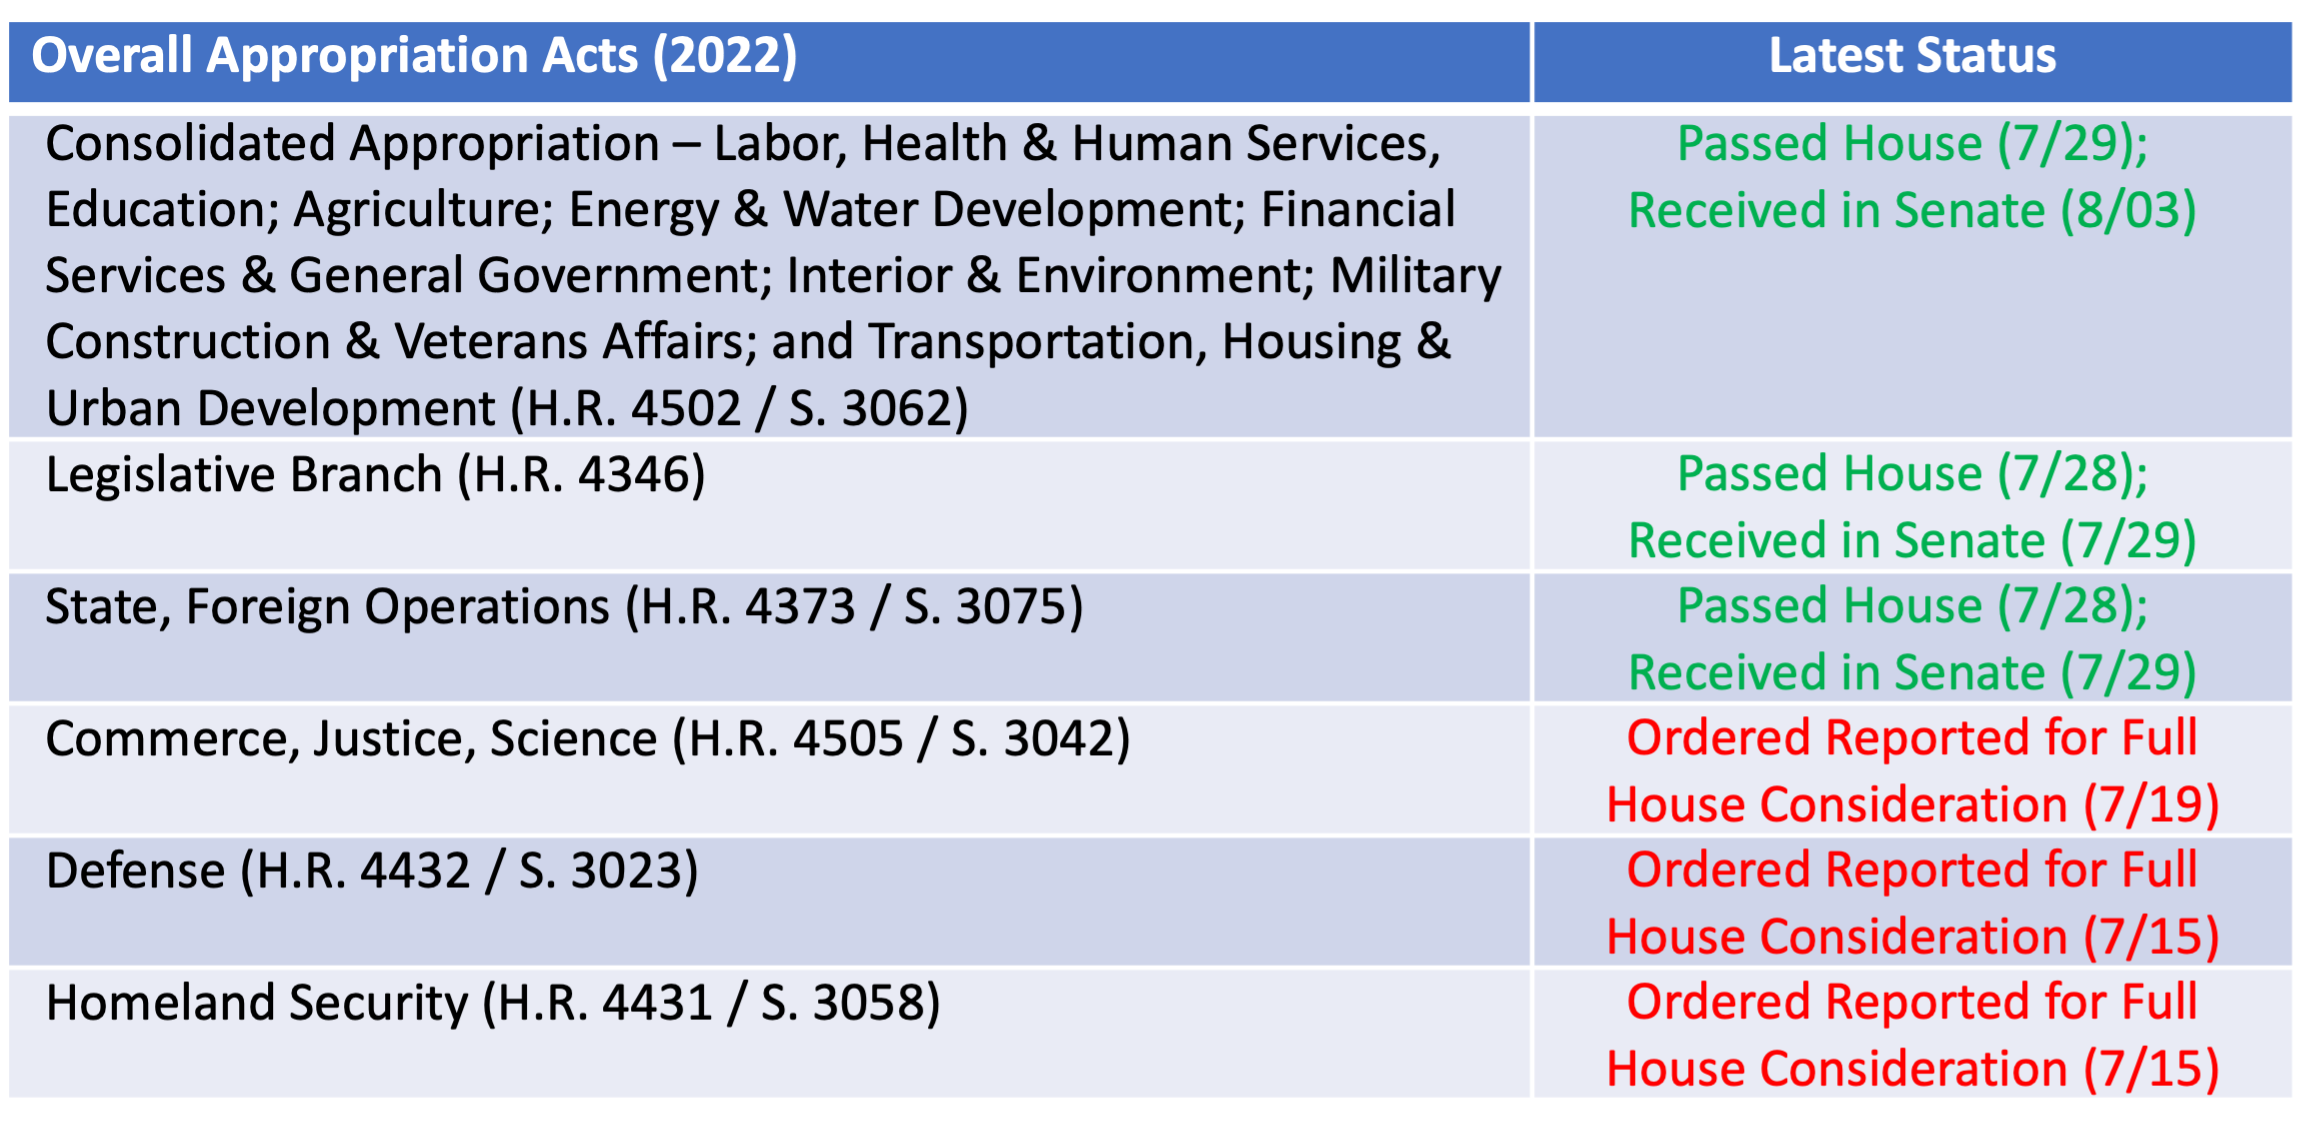 FY 2022 Federal Budget Overall Appropriation Acts